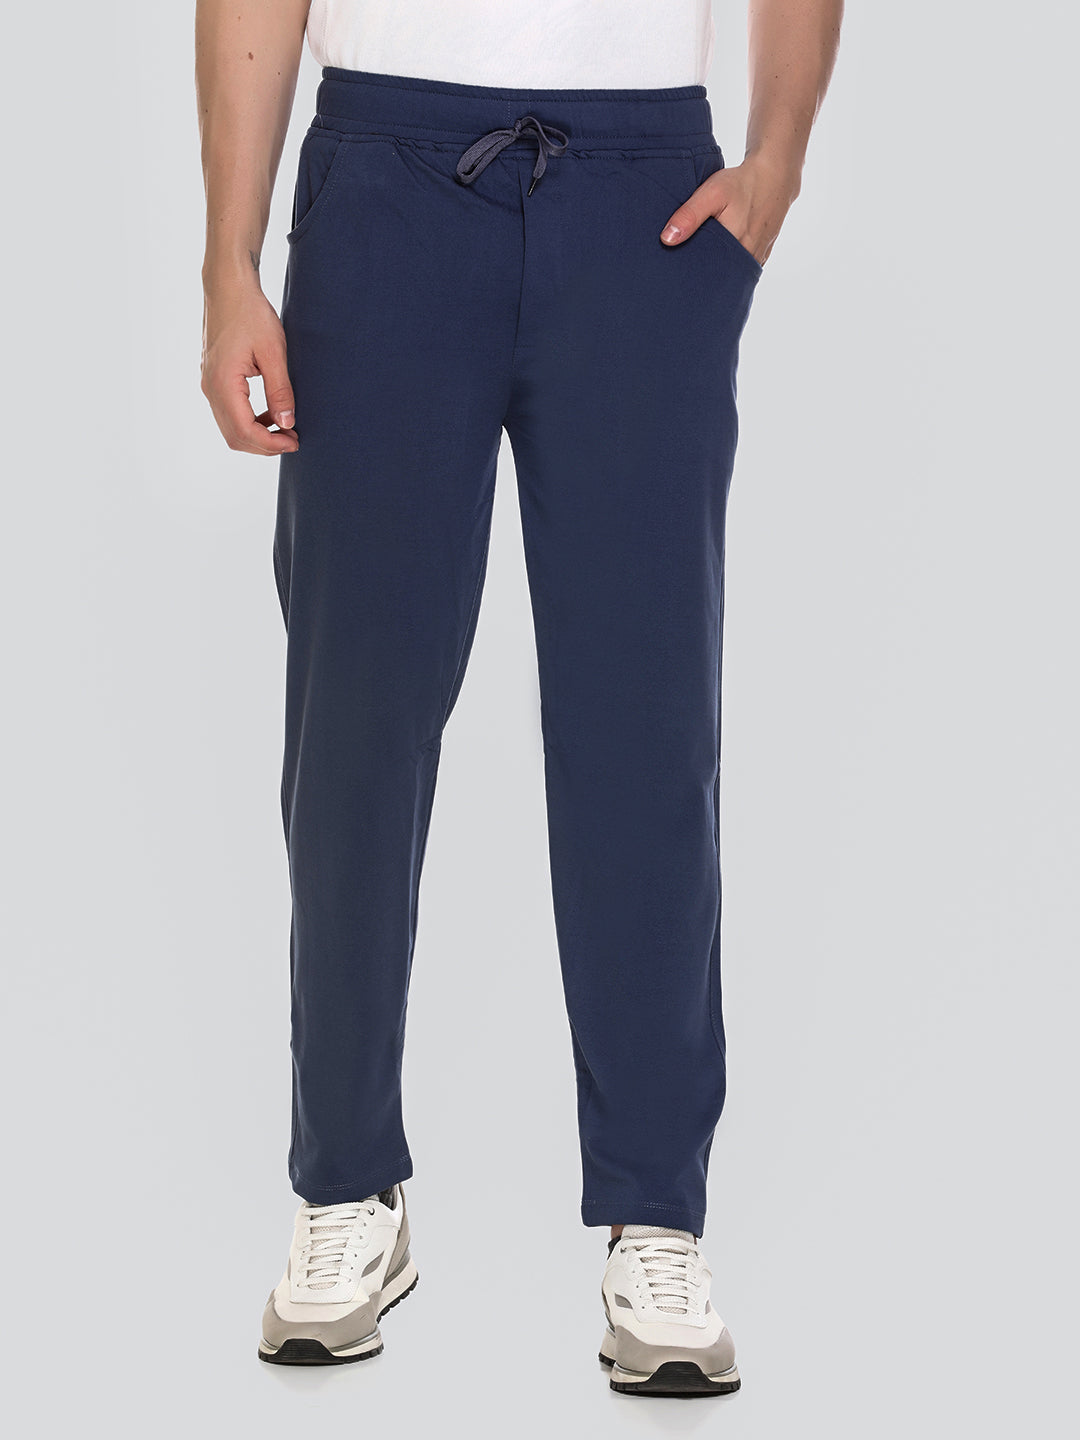 Comfy Blue Cotton Jinxer Regular Fit Sports Lowers For Men At Best Prices Online In India